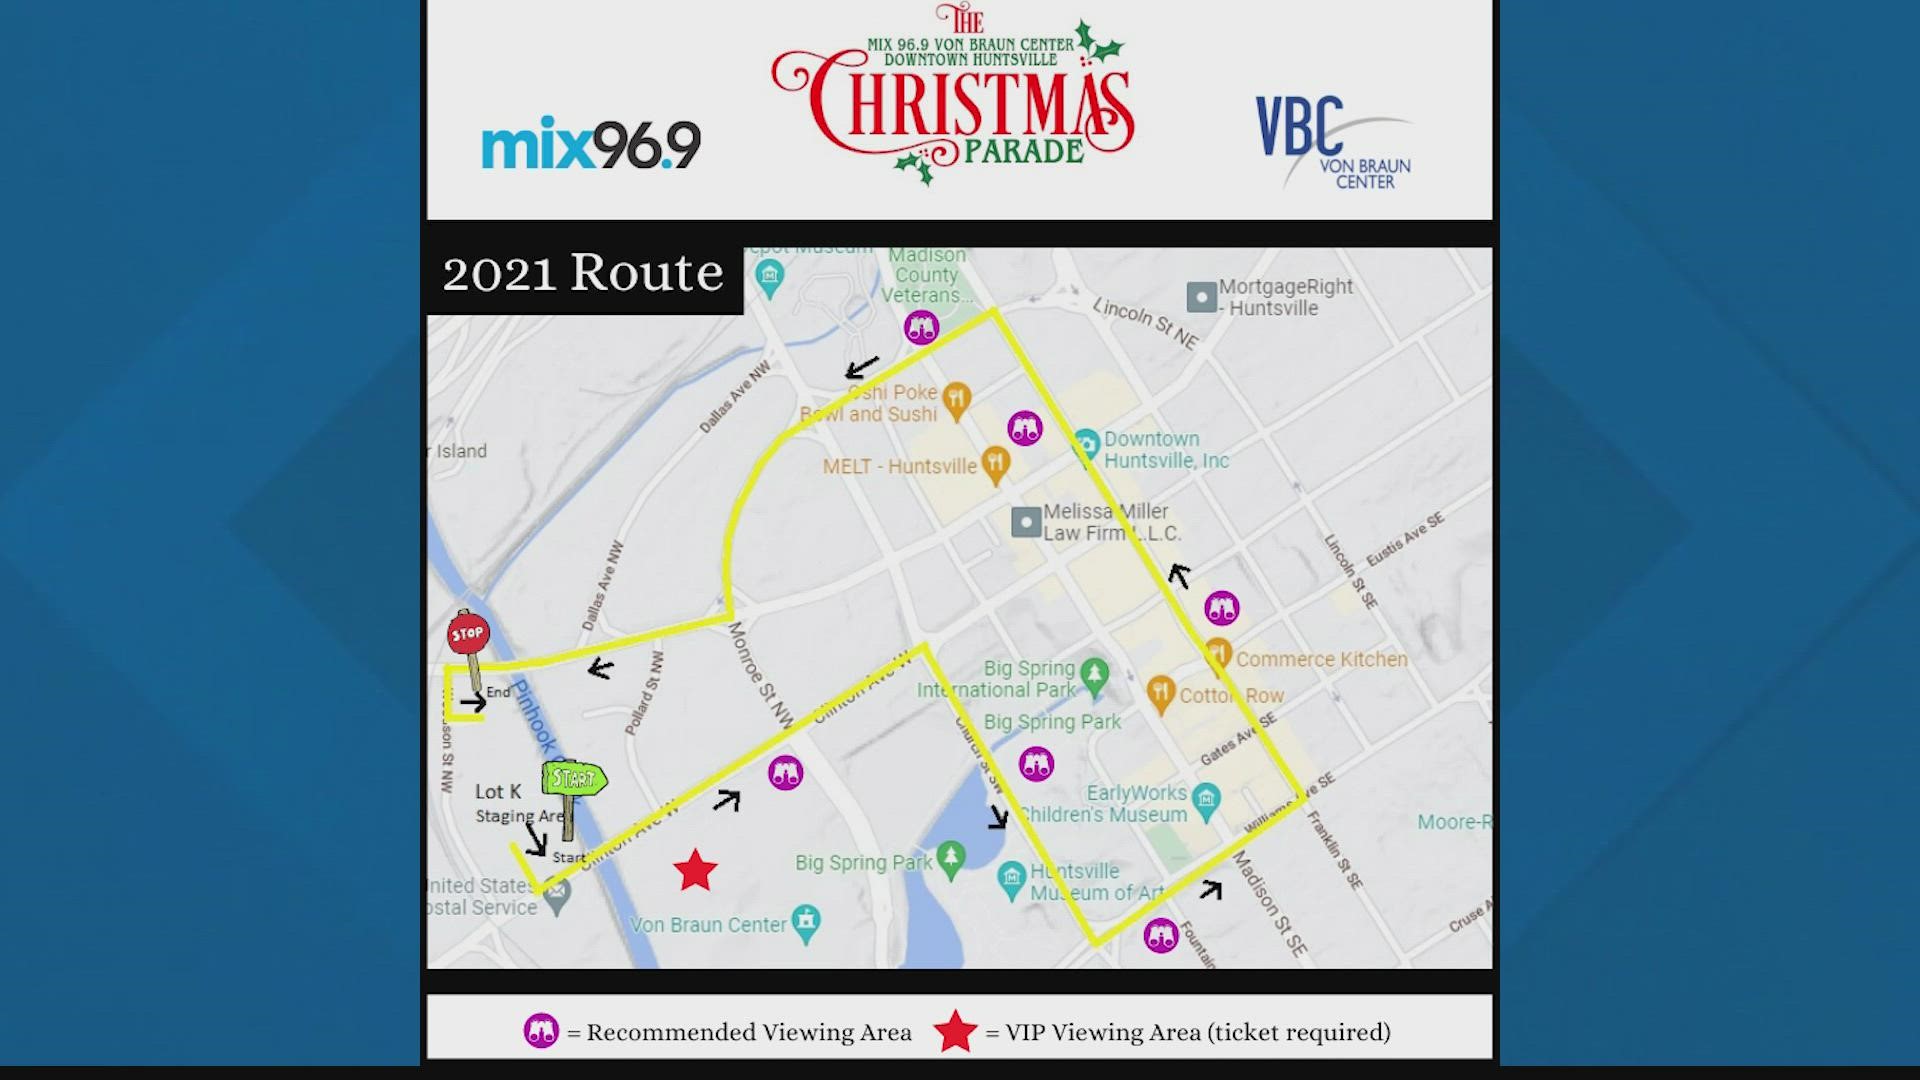 Mix 96.9 (WRSA-FM) and the Von Braun Center (VBC) are excited to host the Huntsville Christmas Parade for the seventh year on Tuesday, December 7, 2021.